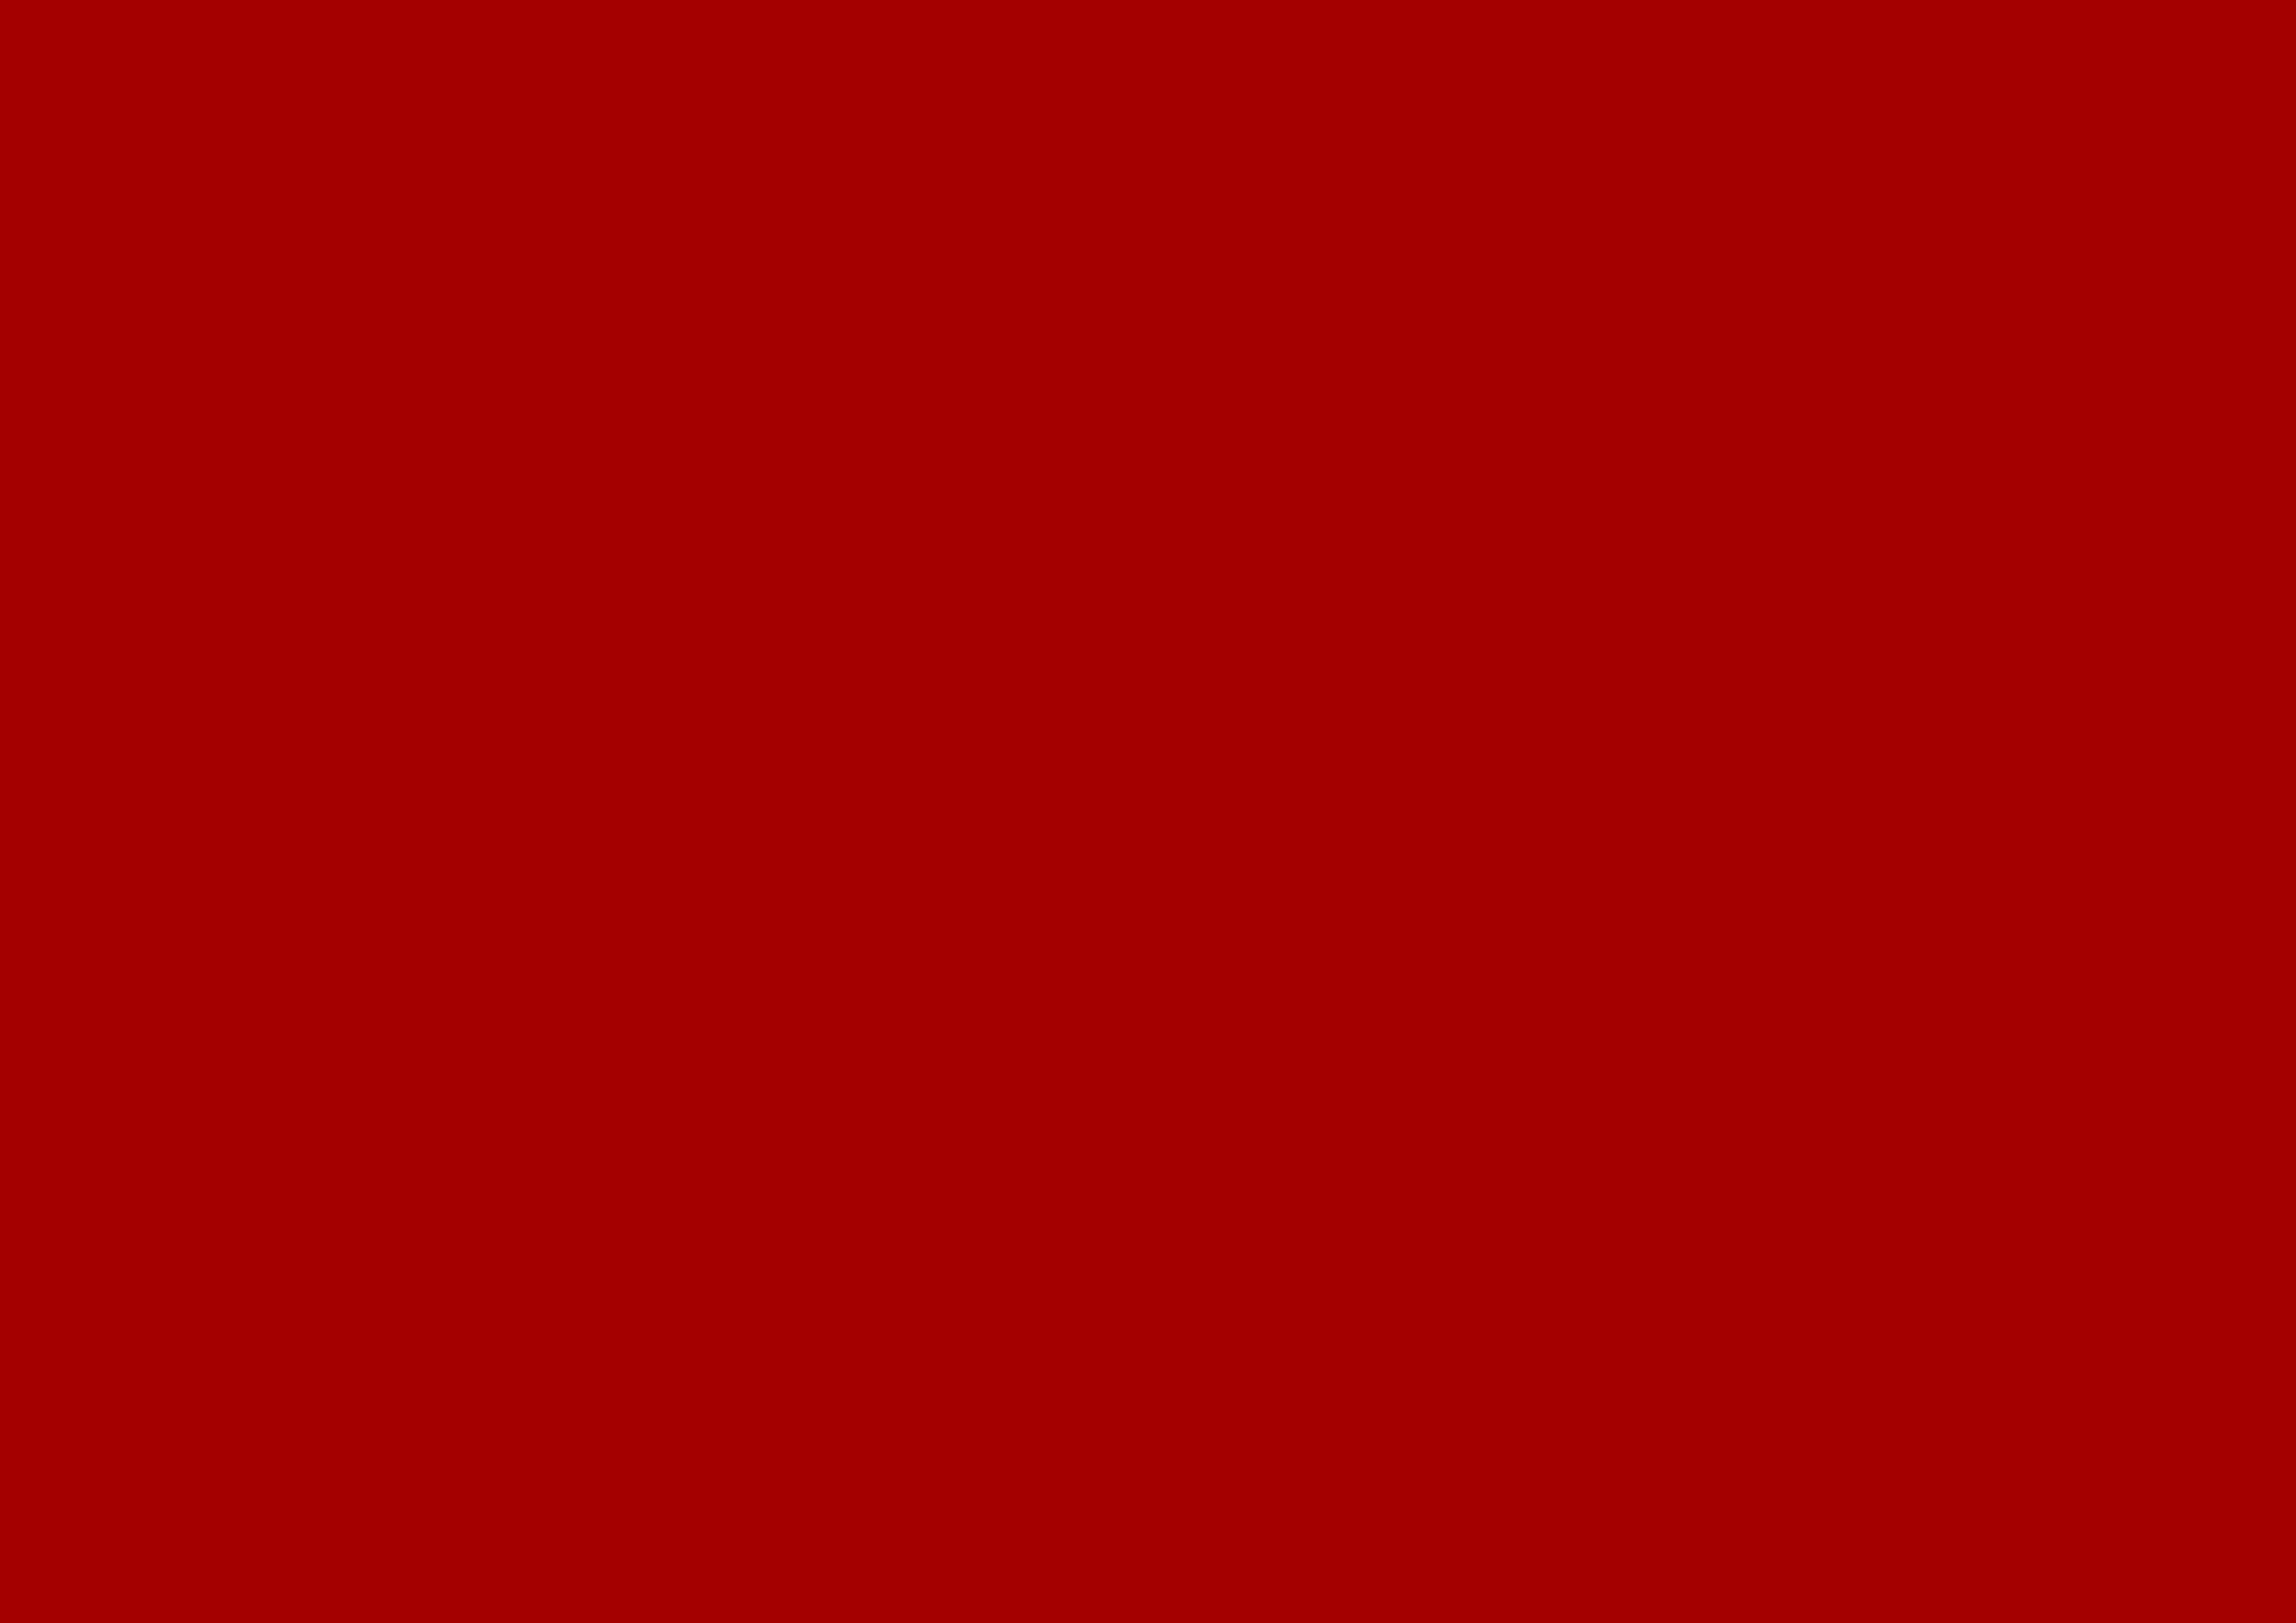 3508x2480 Dark Candy Apple Red Solid Color Background